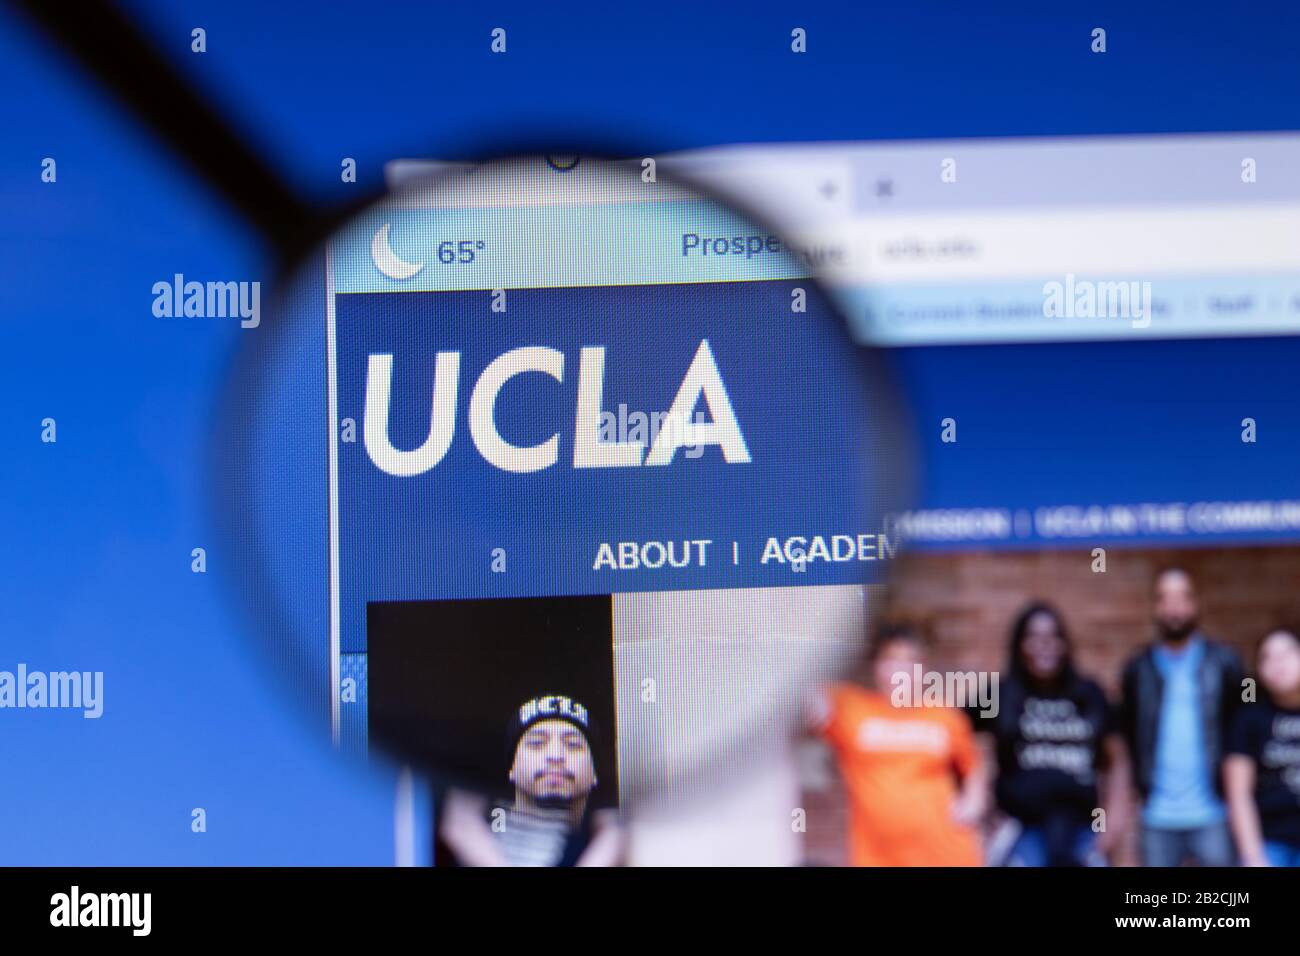 Los Angeles, California, USA - 3 March 2020: University of California, Los Angeles UCLA website homepage logo visible on display screen, Illustrative Stock Photo